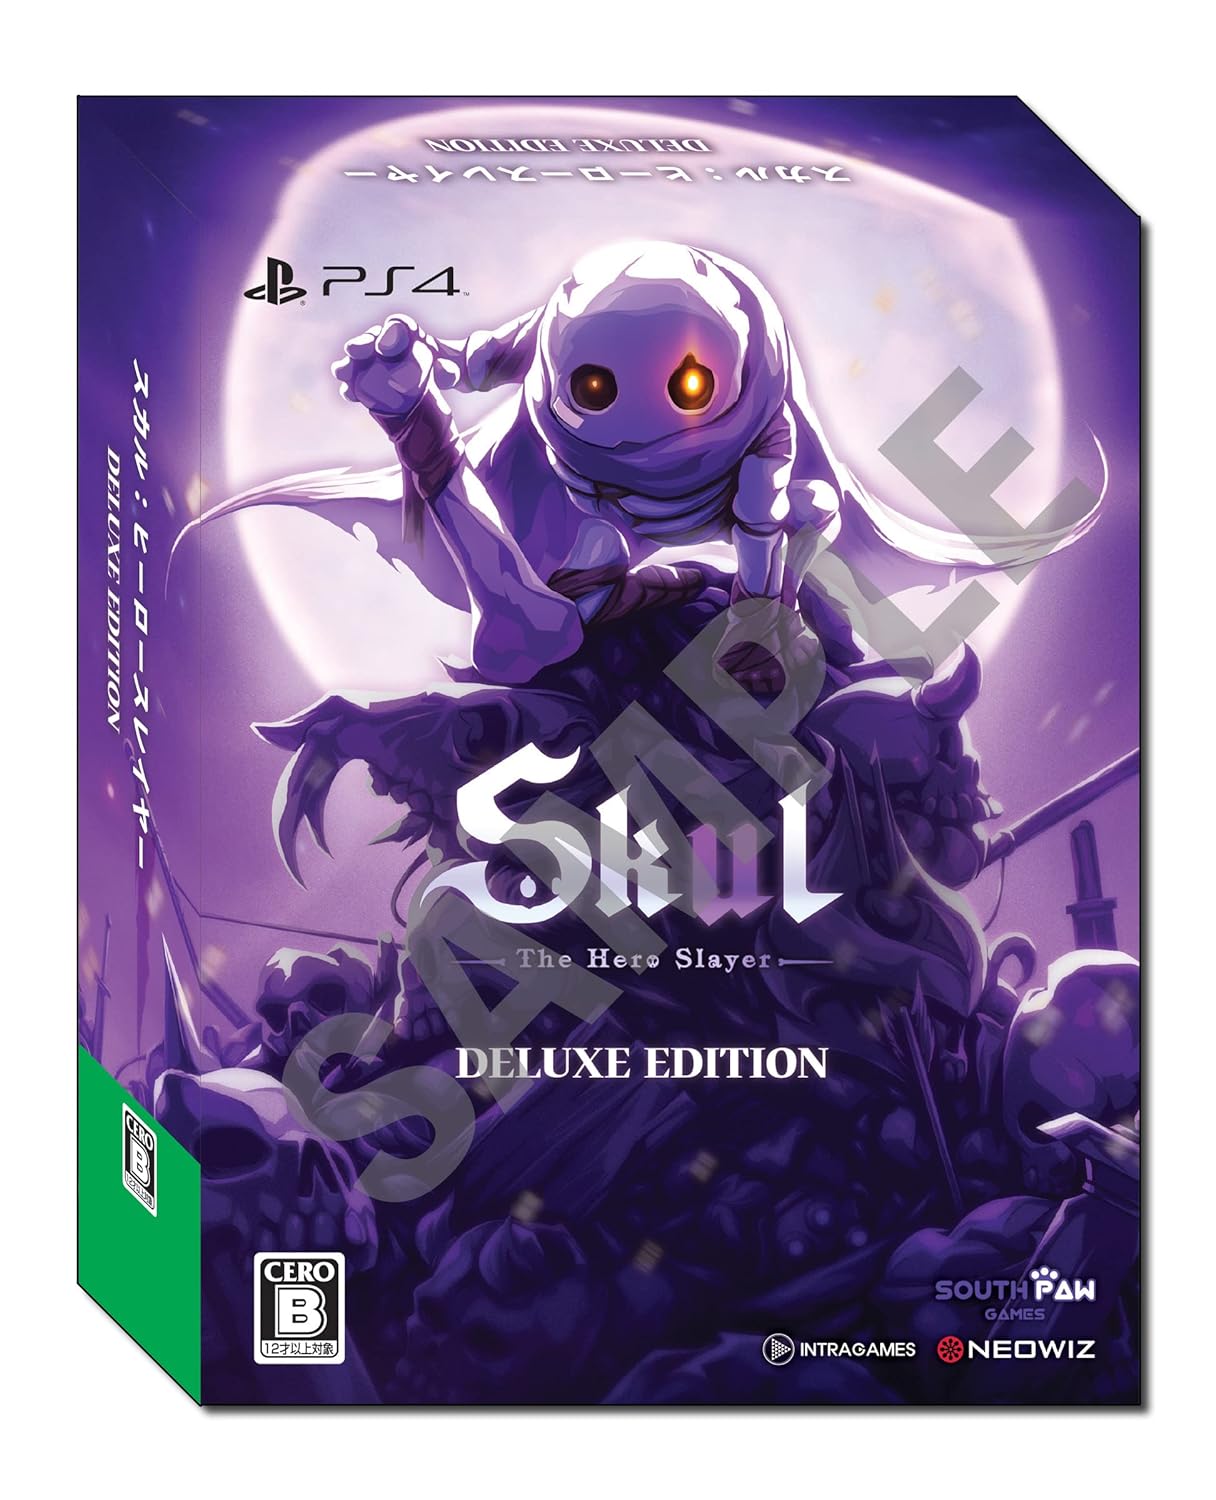 SKUL: THE HERO SLAYER DELUXE EDITION PS4